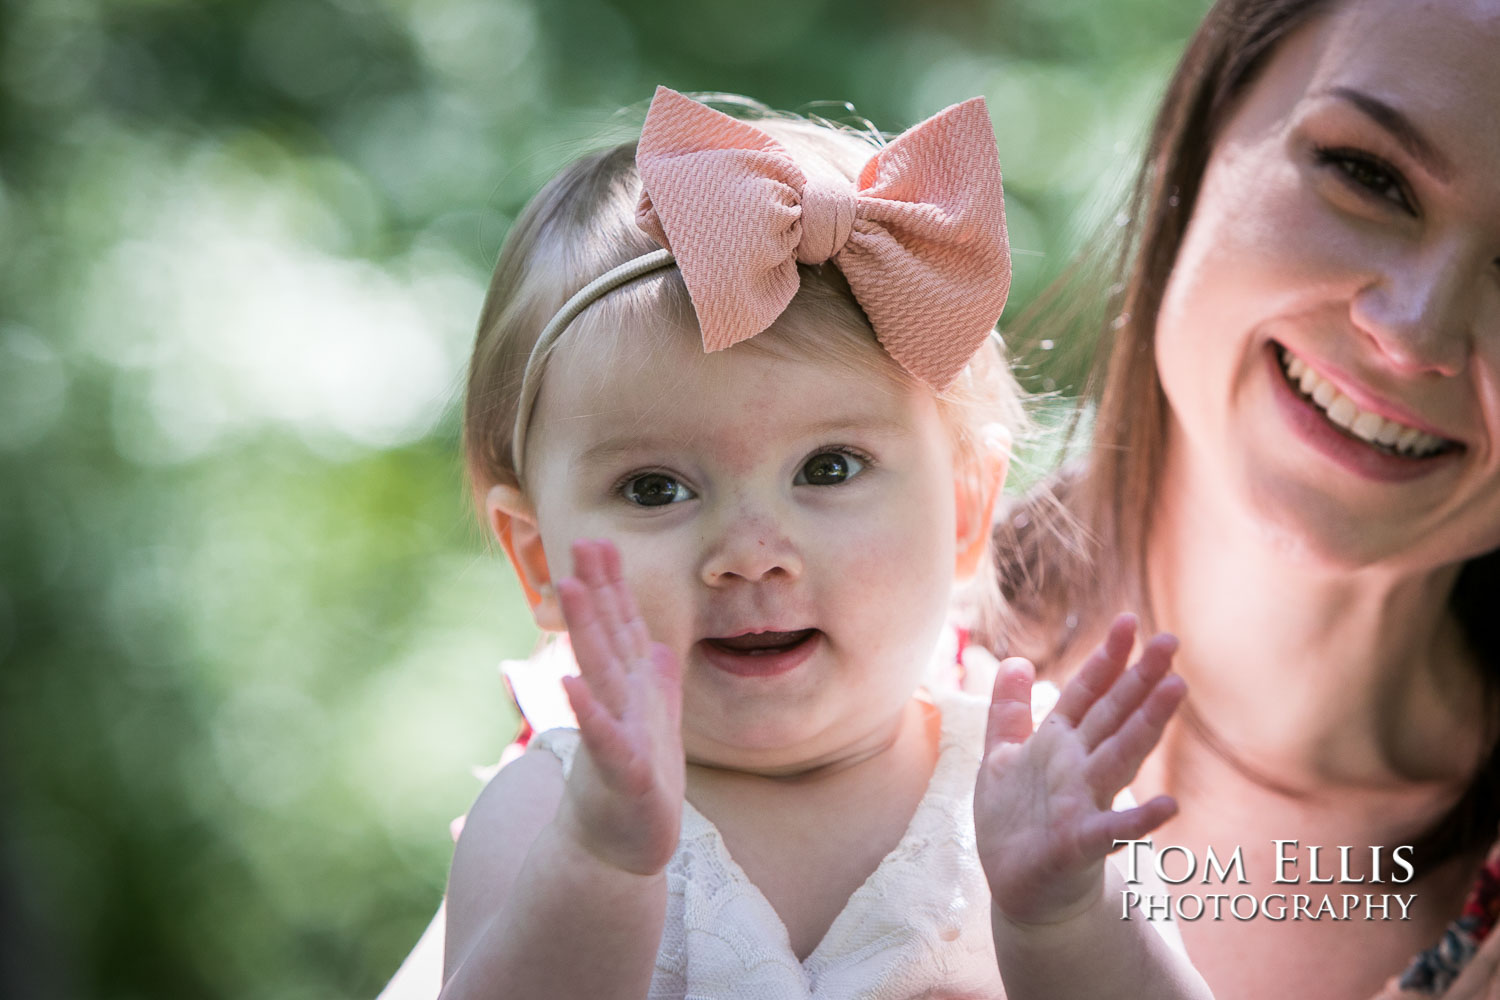 Addison claps her hands while mom Ashley looks on during their birthday/family photo session. Tom Ellis Photography